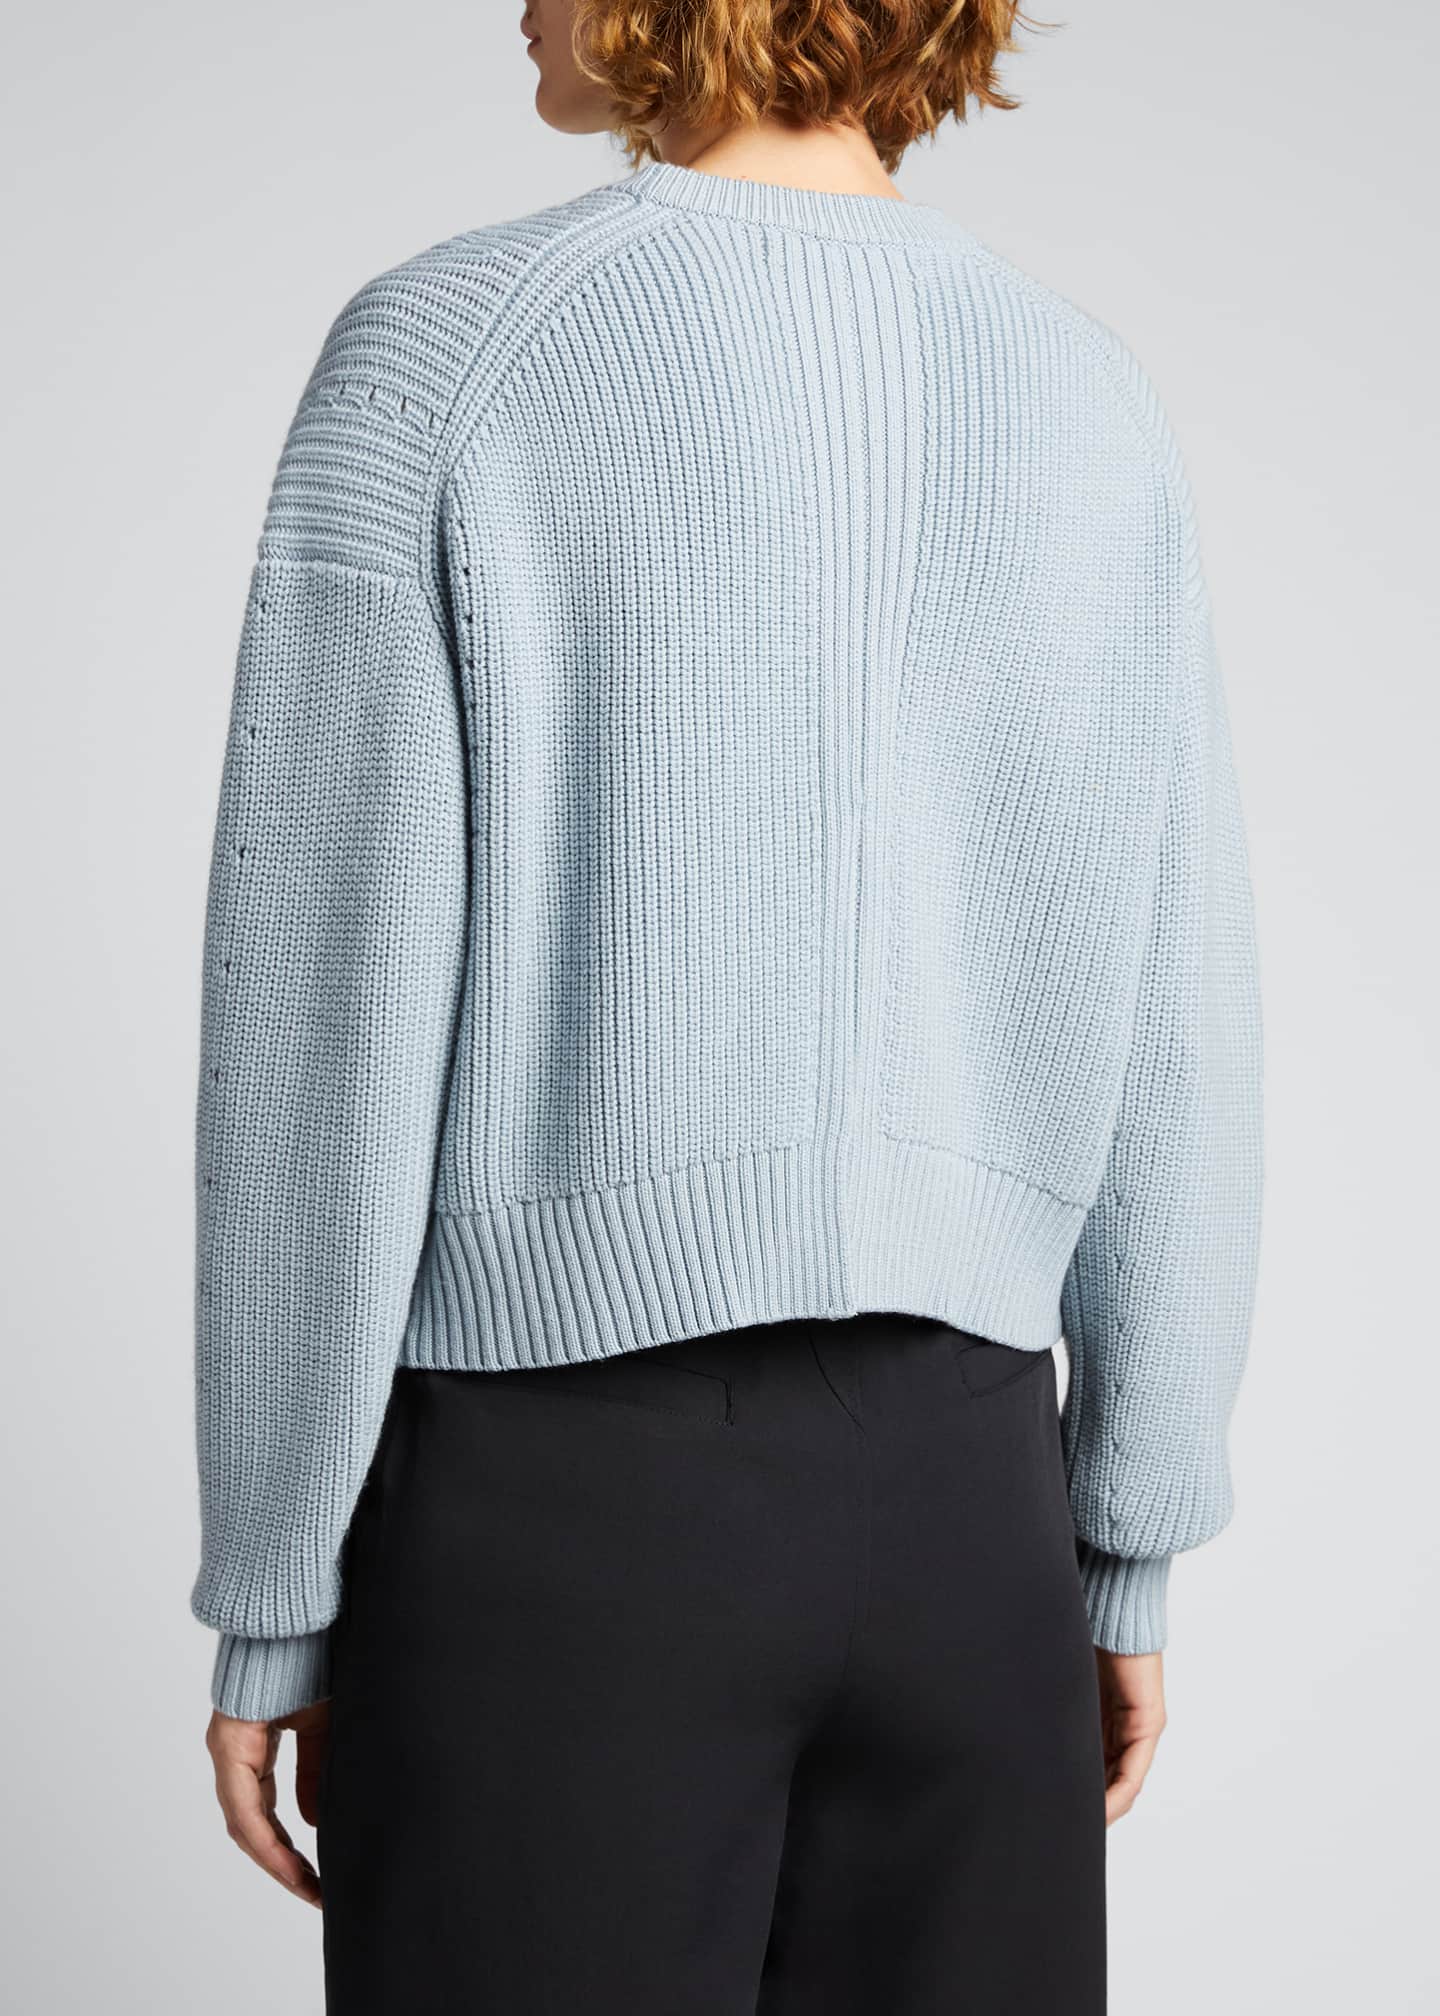 Proenza Schouler White Label Merino Wool Sweater with Back Slit ...